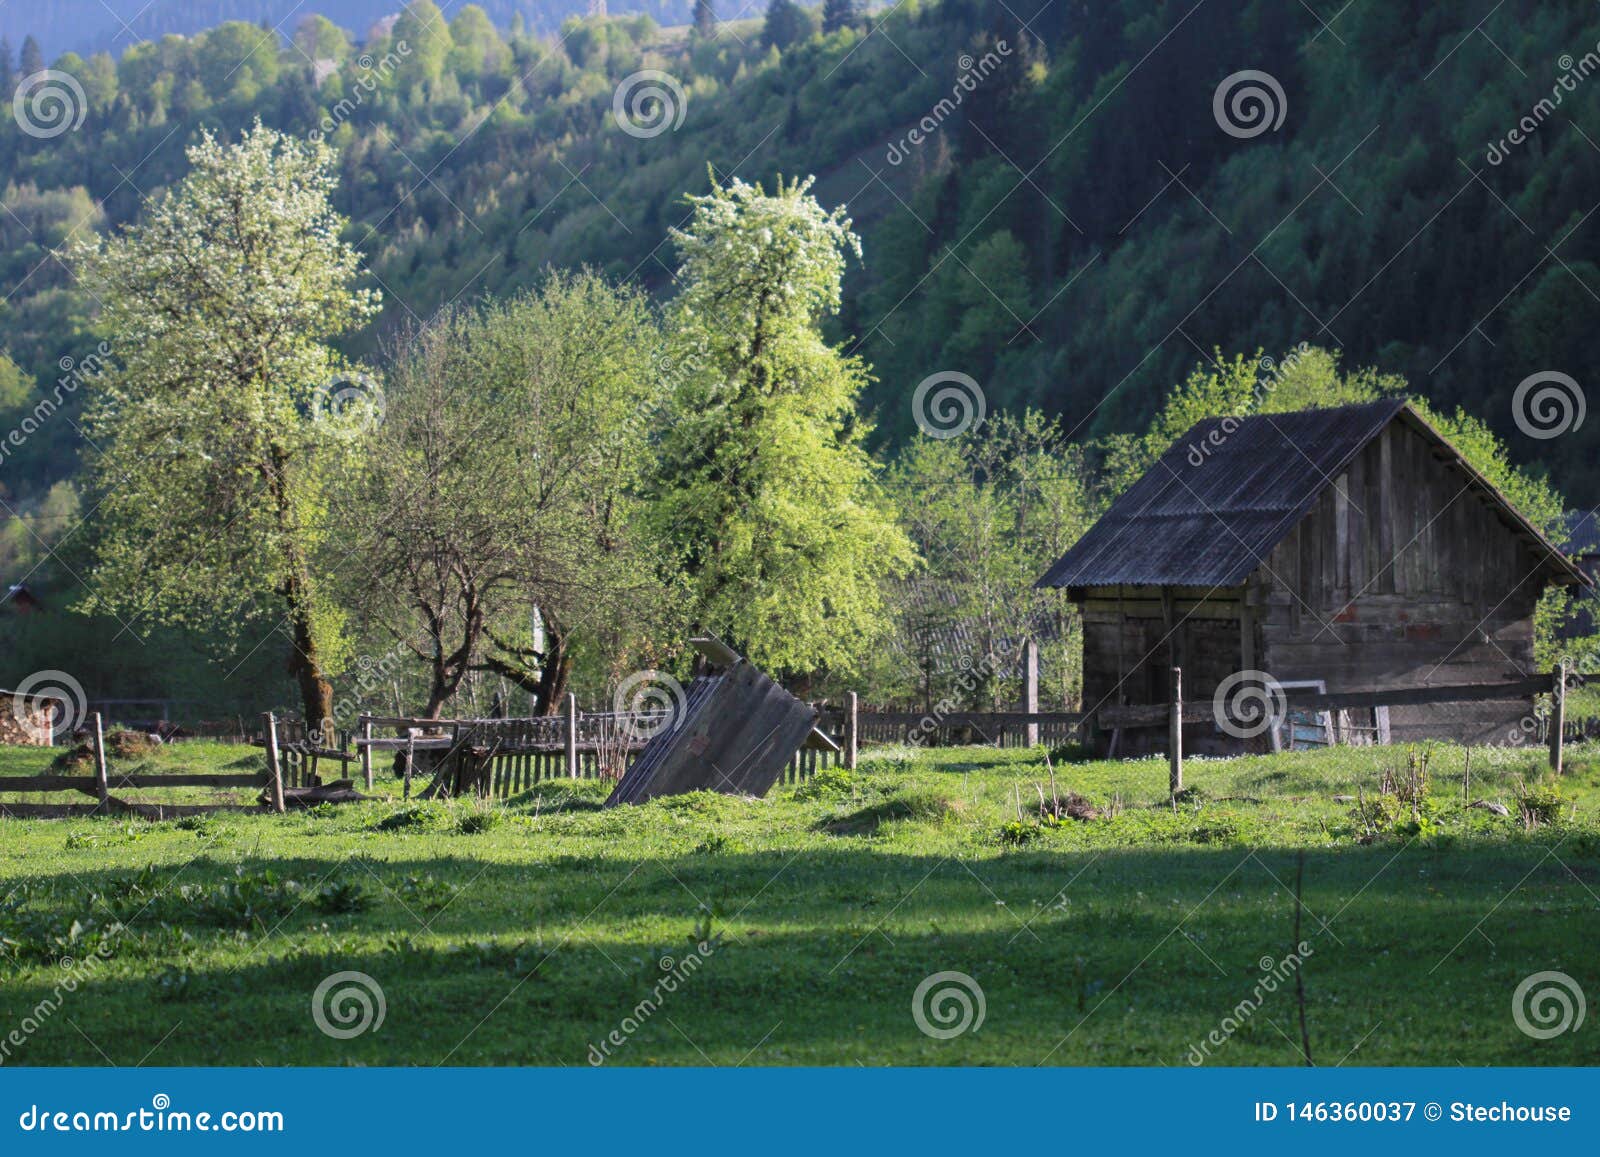 a bucolic wooden house in the carpathians